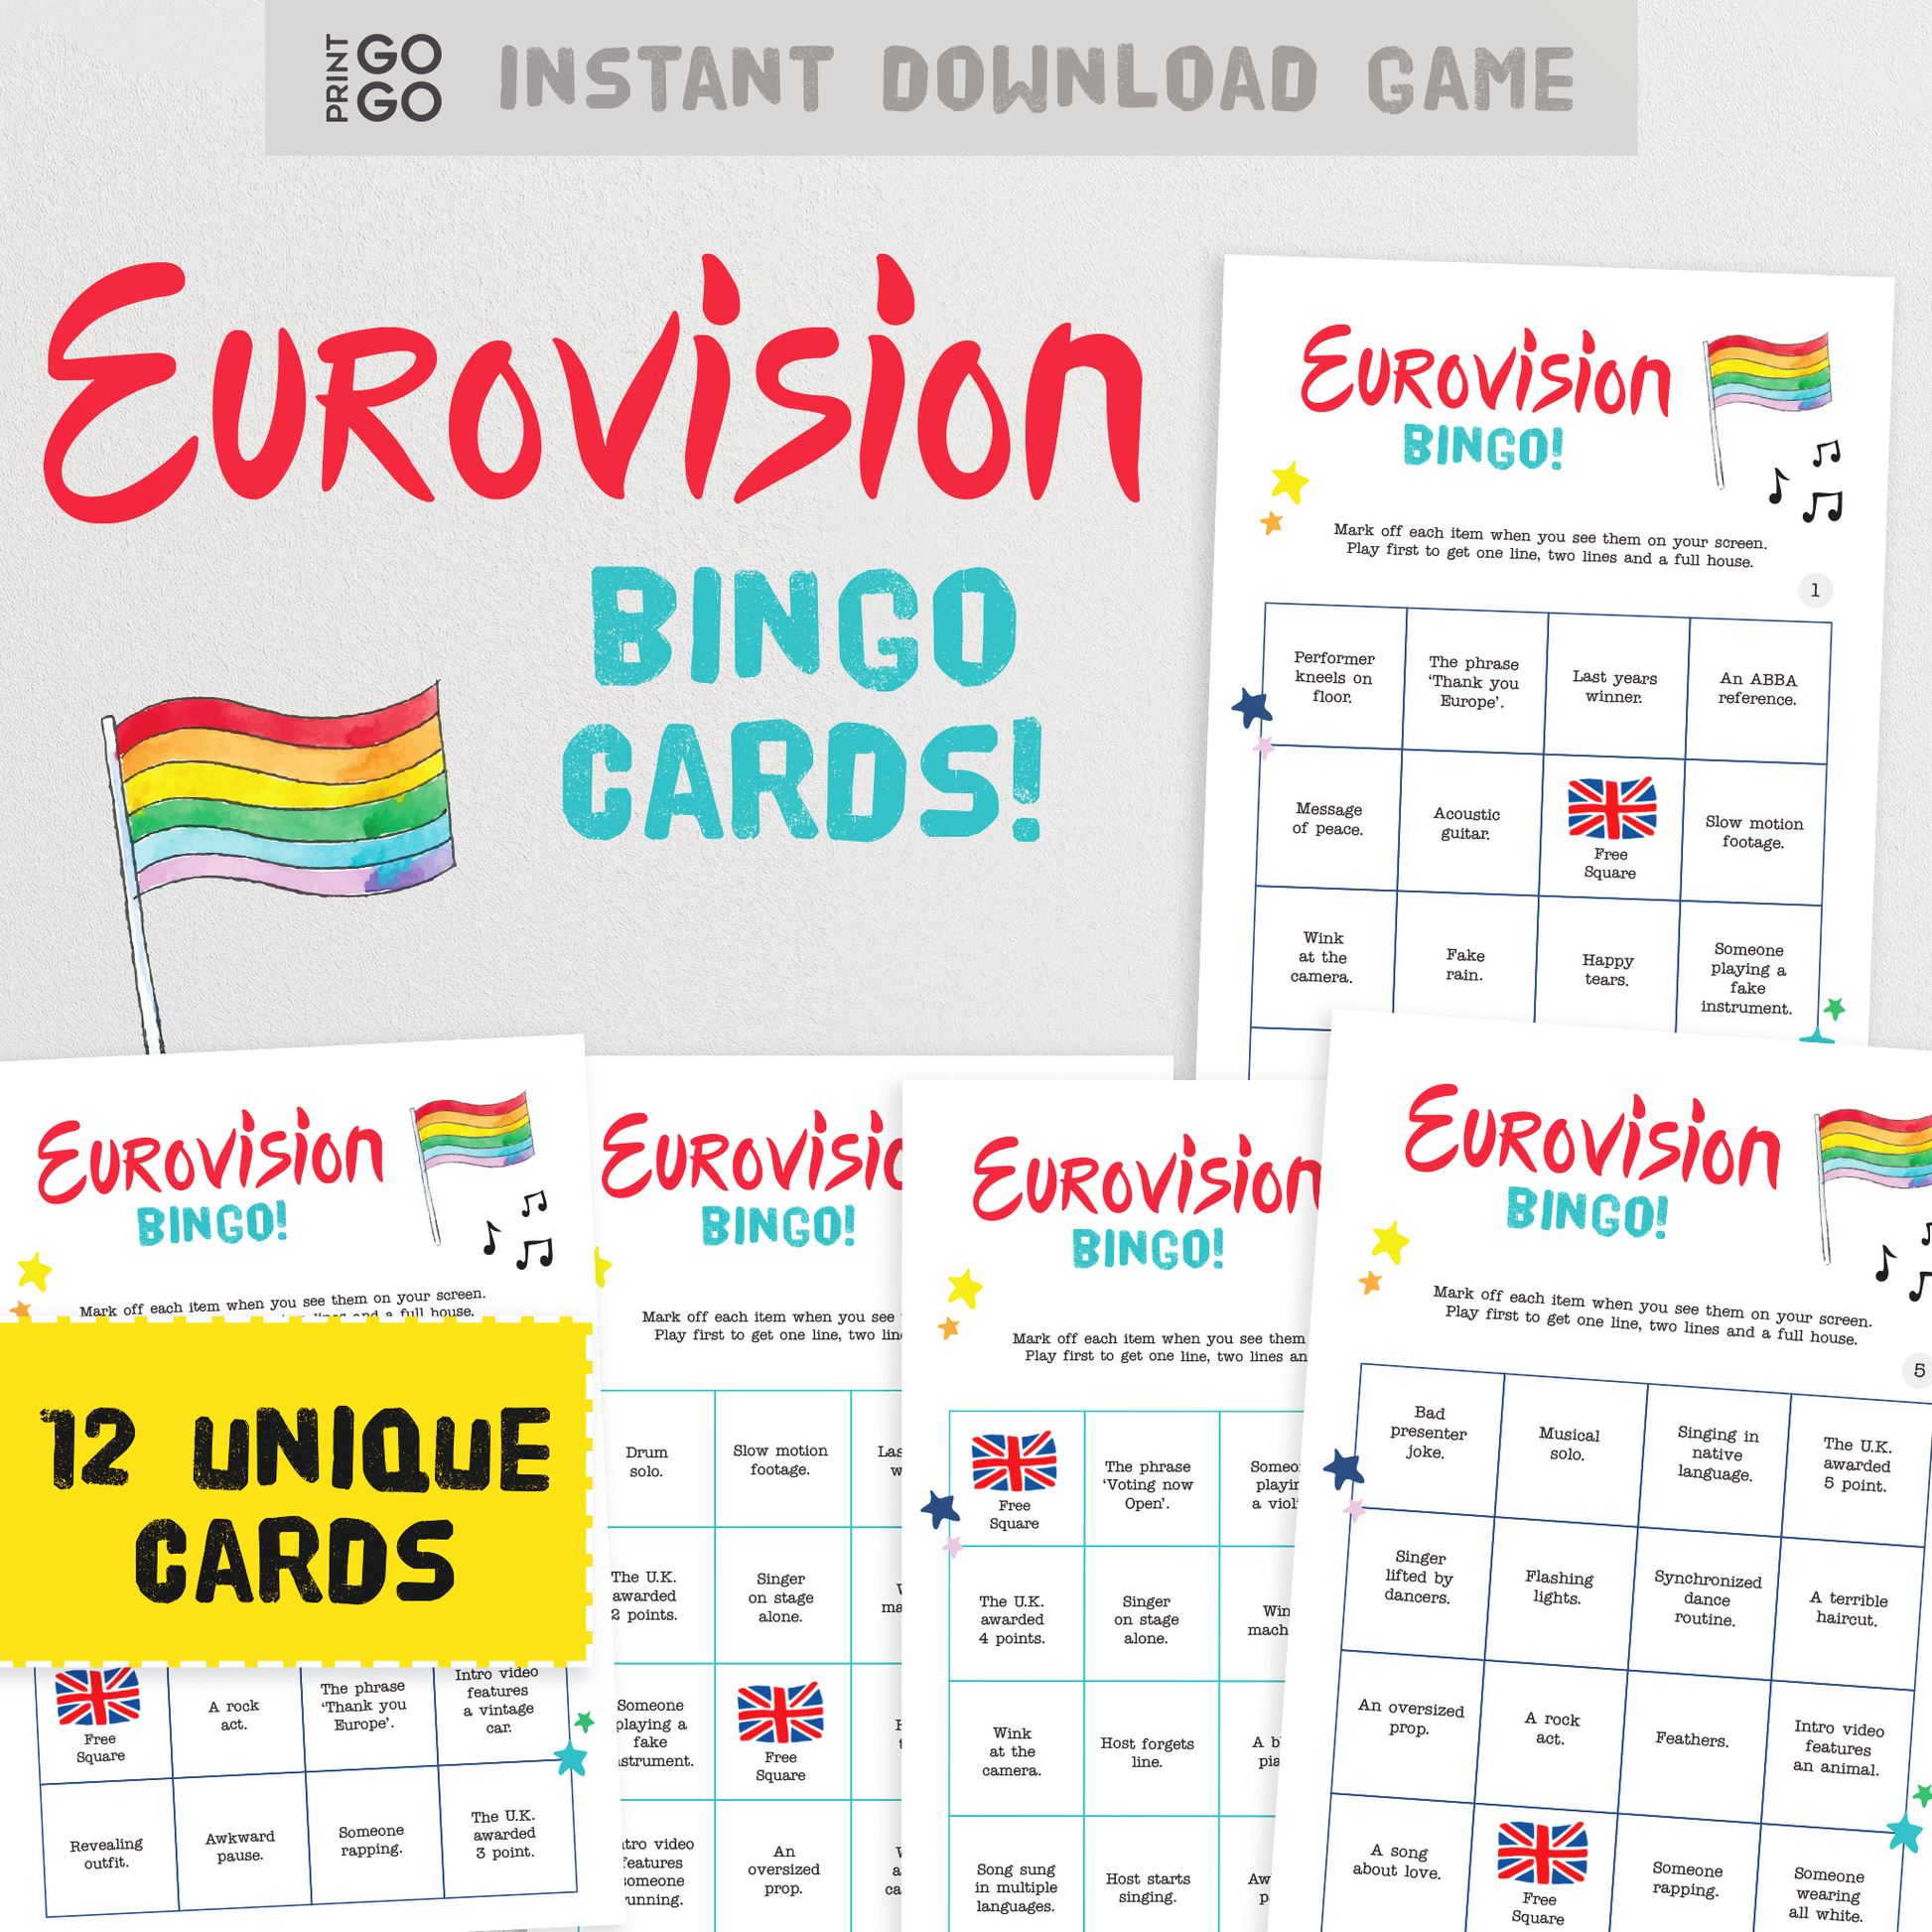 12 Eurovision Song Contest Bingo Cards - The Ultimate Group Party Game